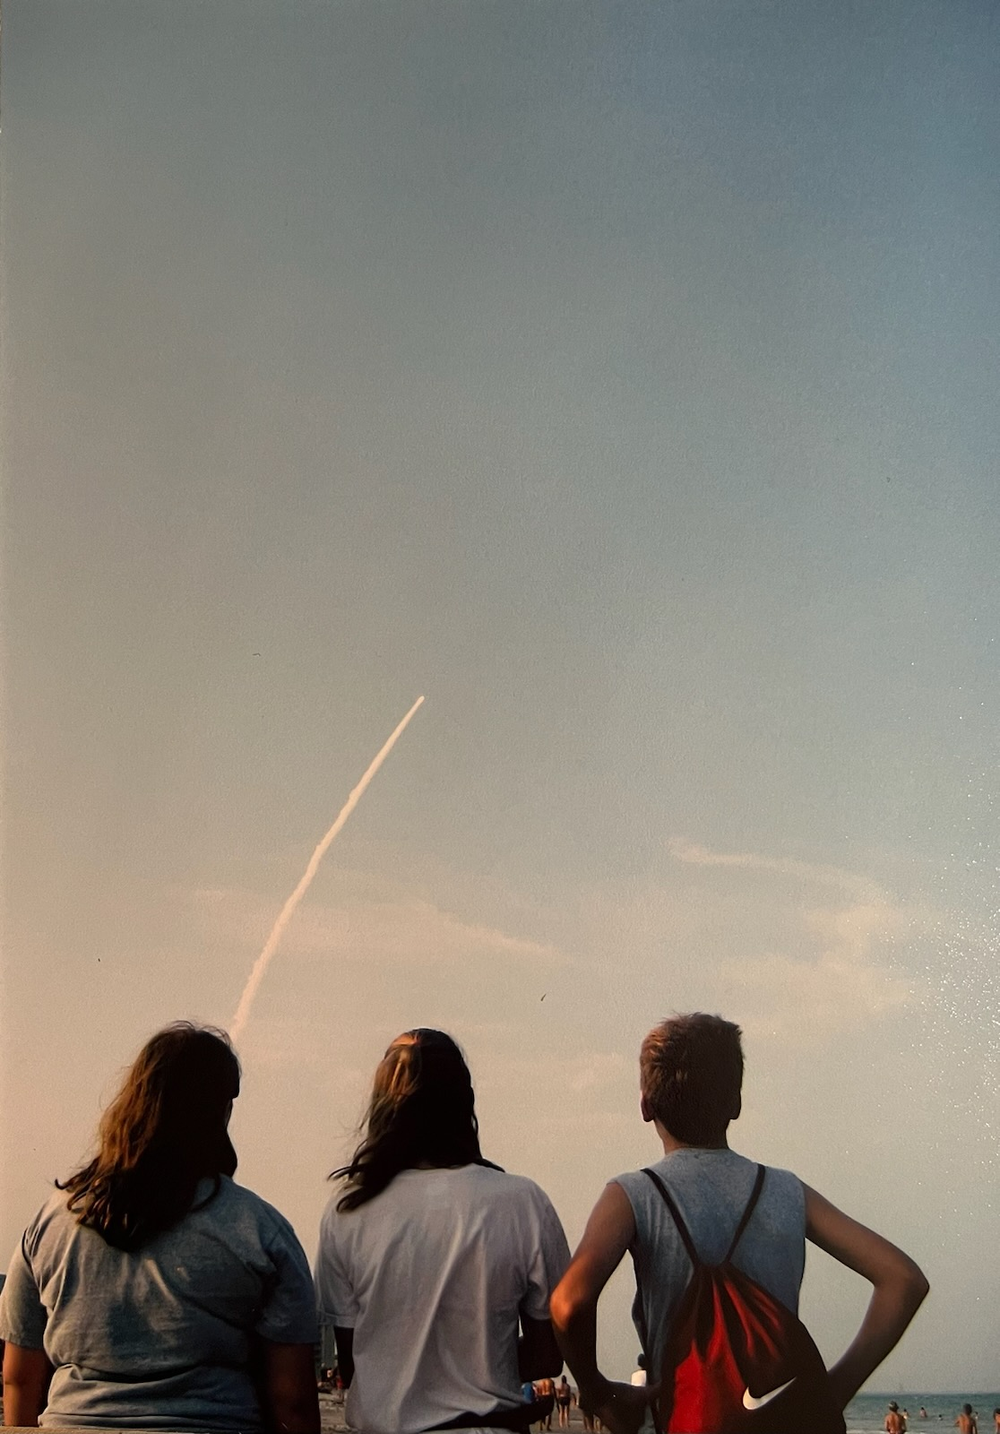 Three people watch a shuttle launch from the beach.